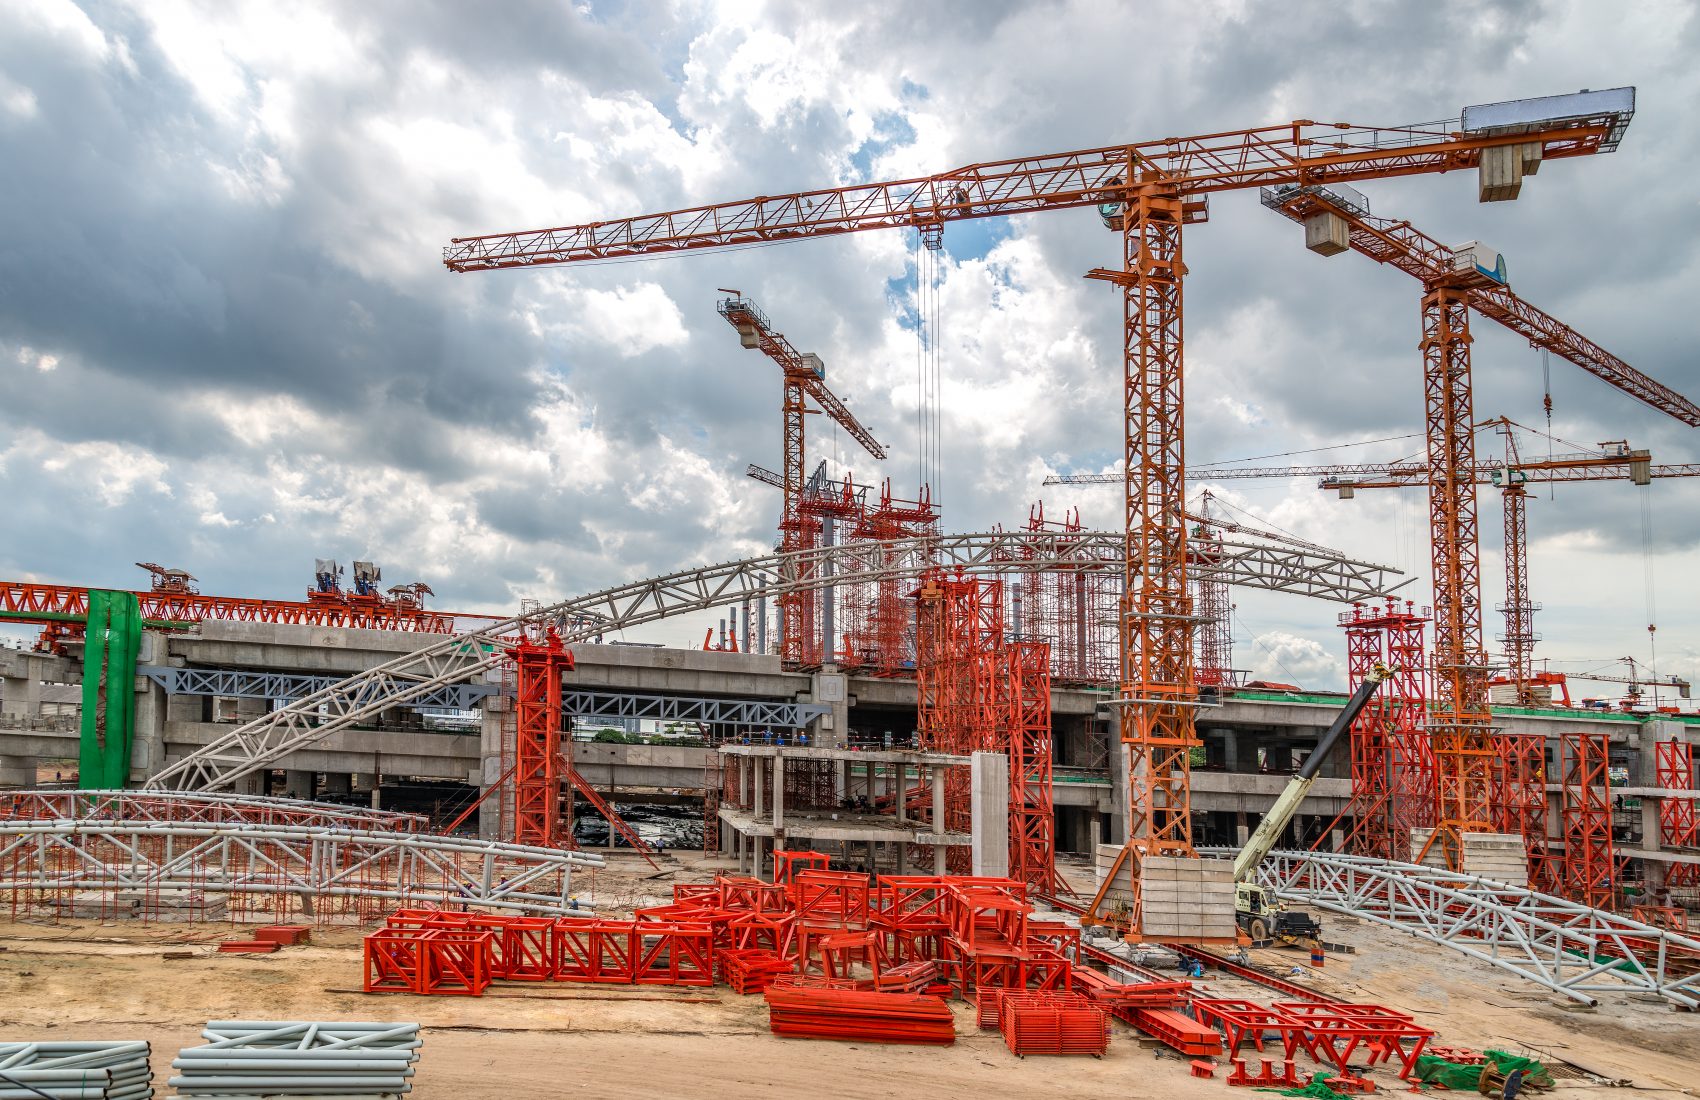 Cranes Working on Expressway Construction Sites in Asia